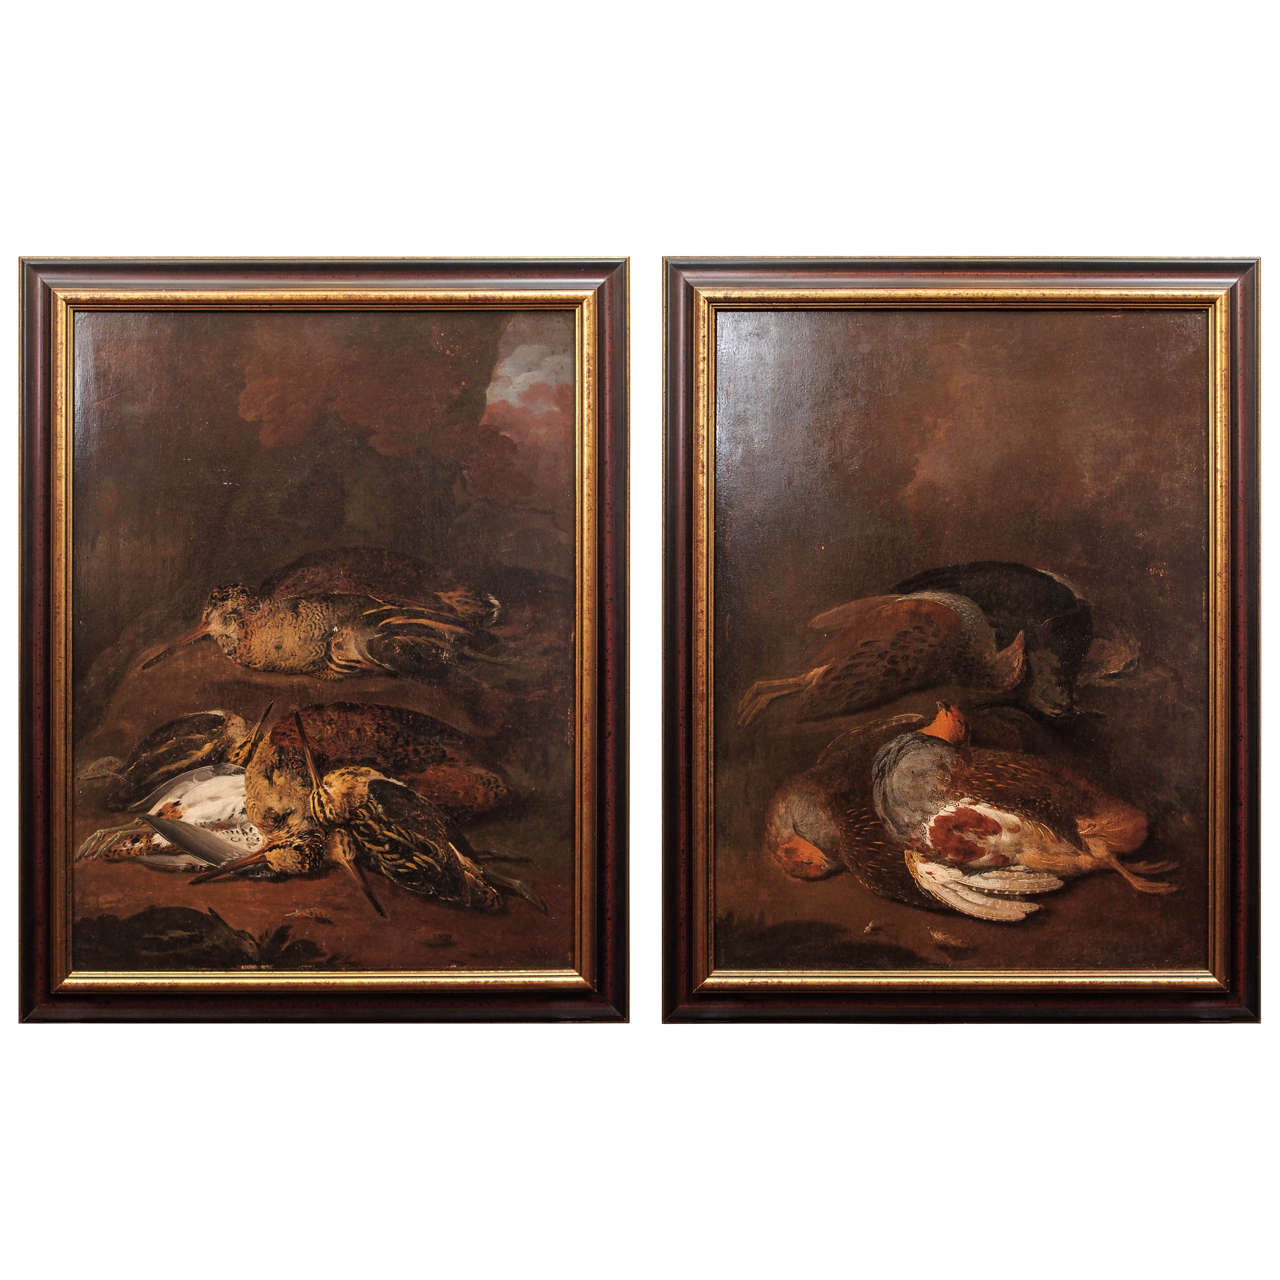 Pair of Engish Nature Morte Oil on Board